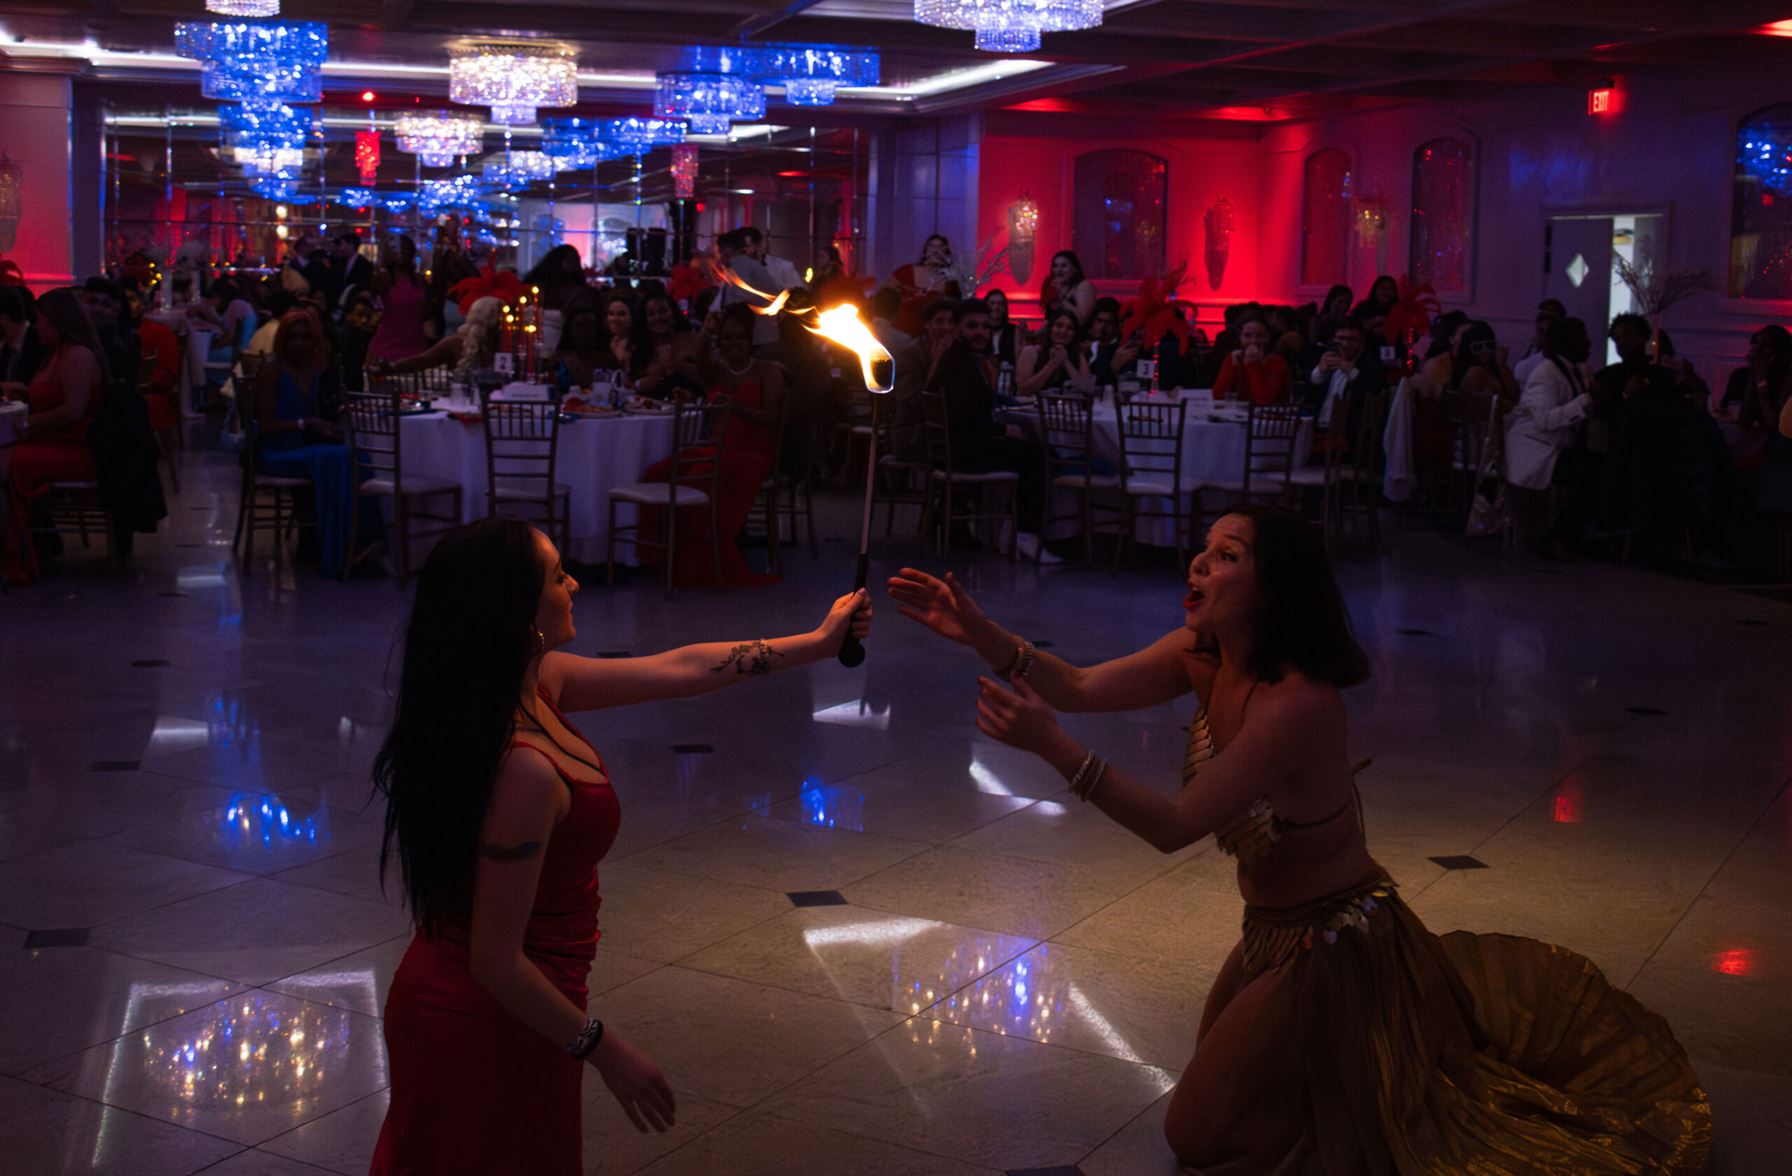 The fire dancer passes torch to an audience member. - Photo by Victoria Howell